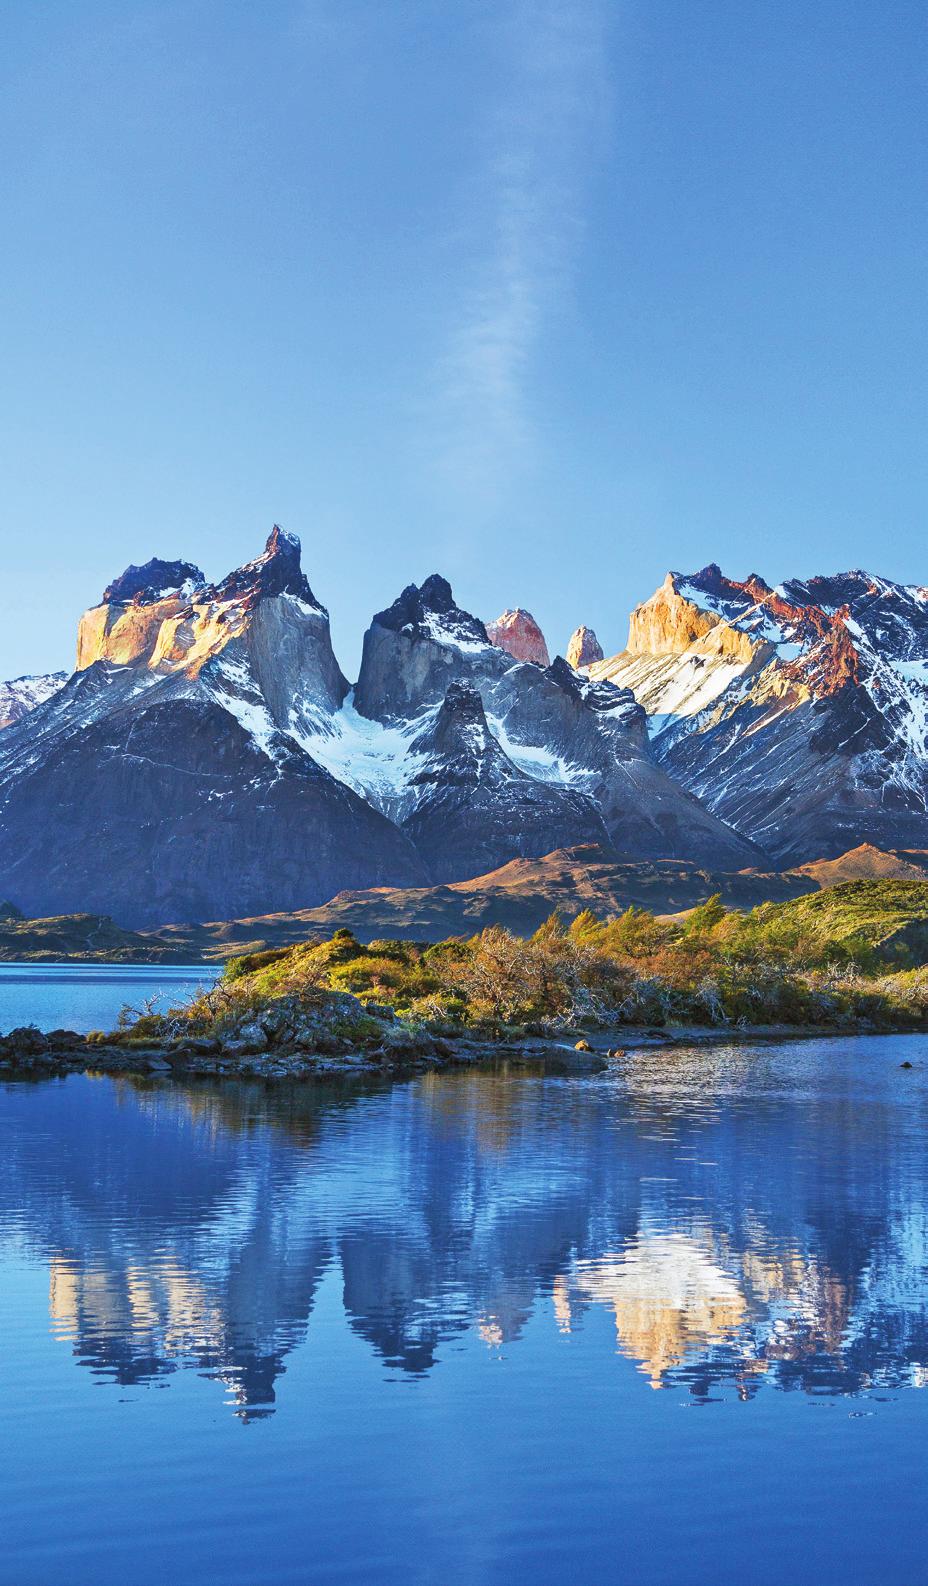 Tour limited to 24 Alumni Association members and friends Day 8: Torres del Paine/El Calafate, Argentina We travel to Argentine Patagonia today, crossing the border at Cancha Carrera then continuing